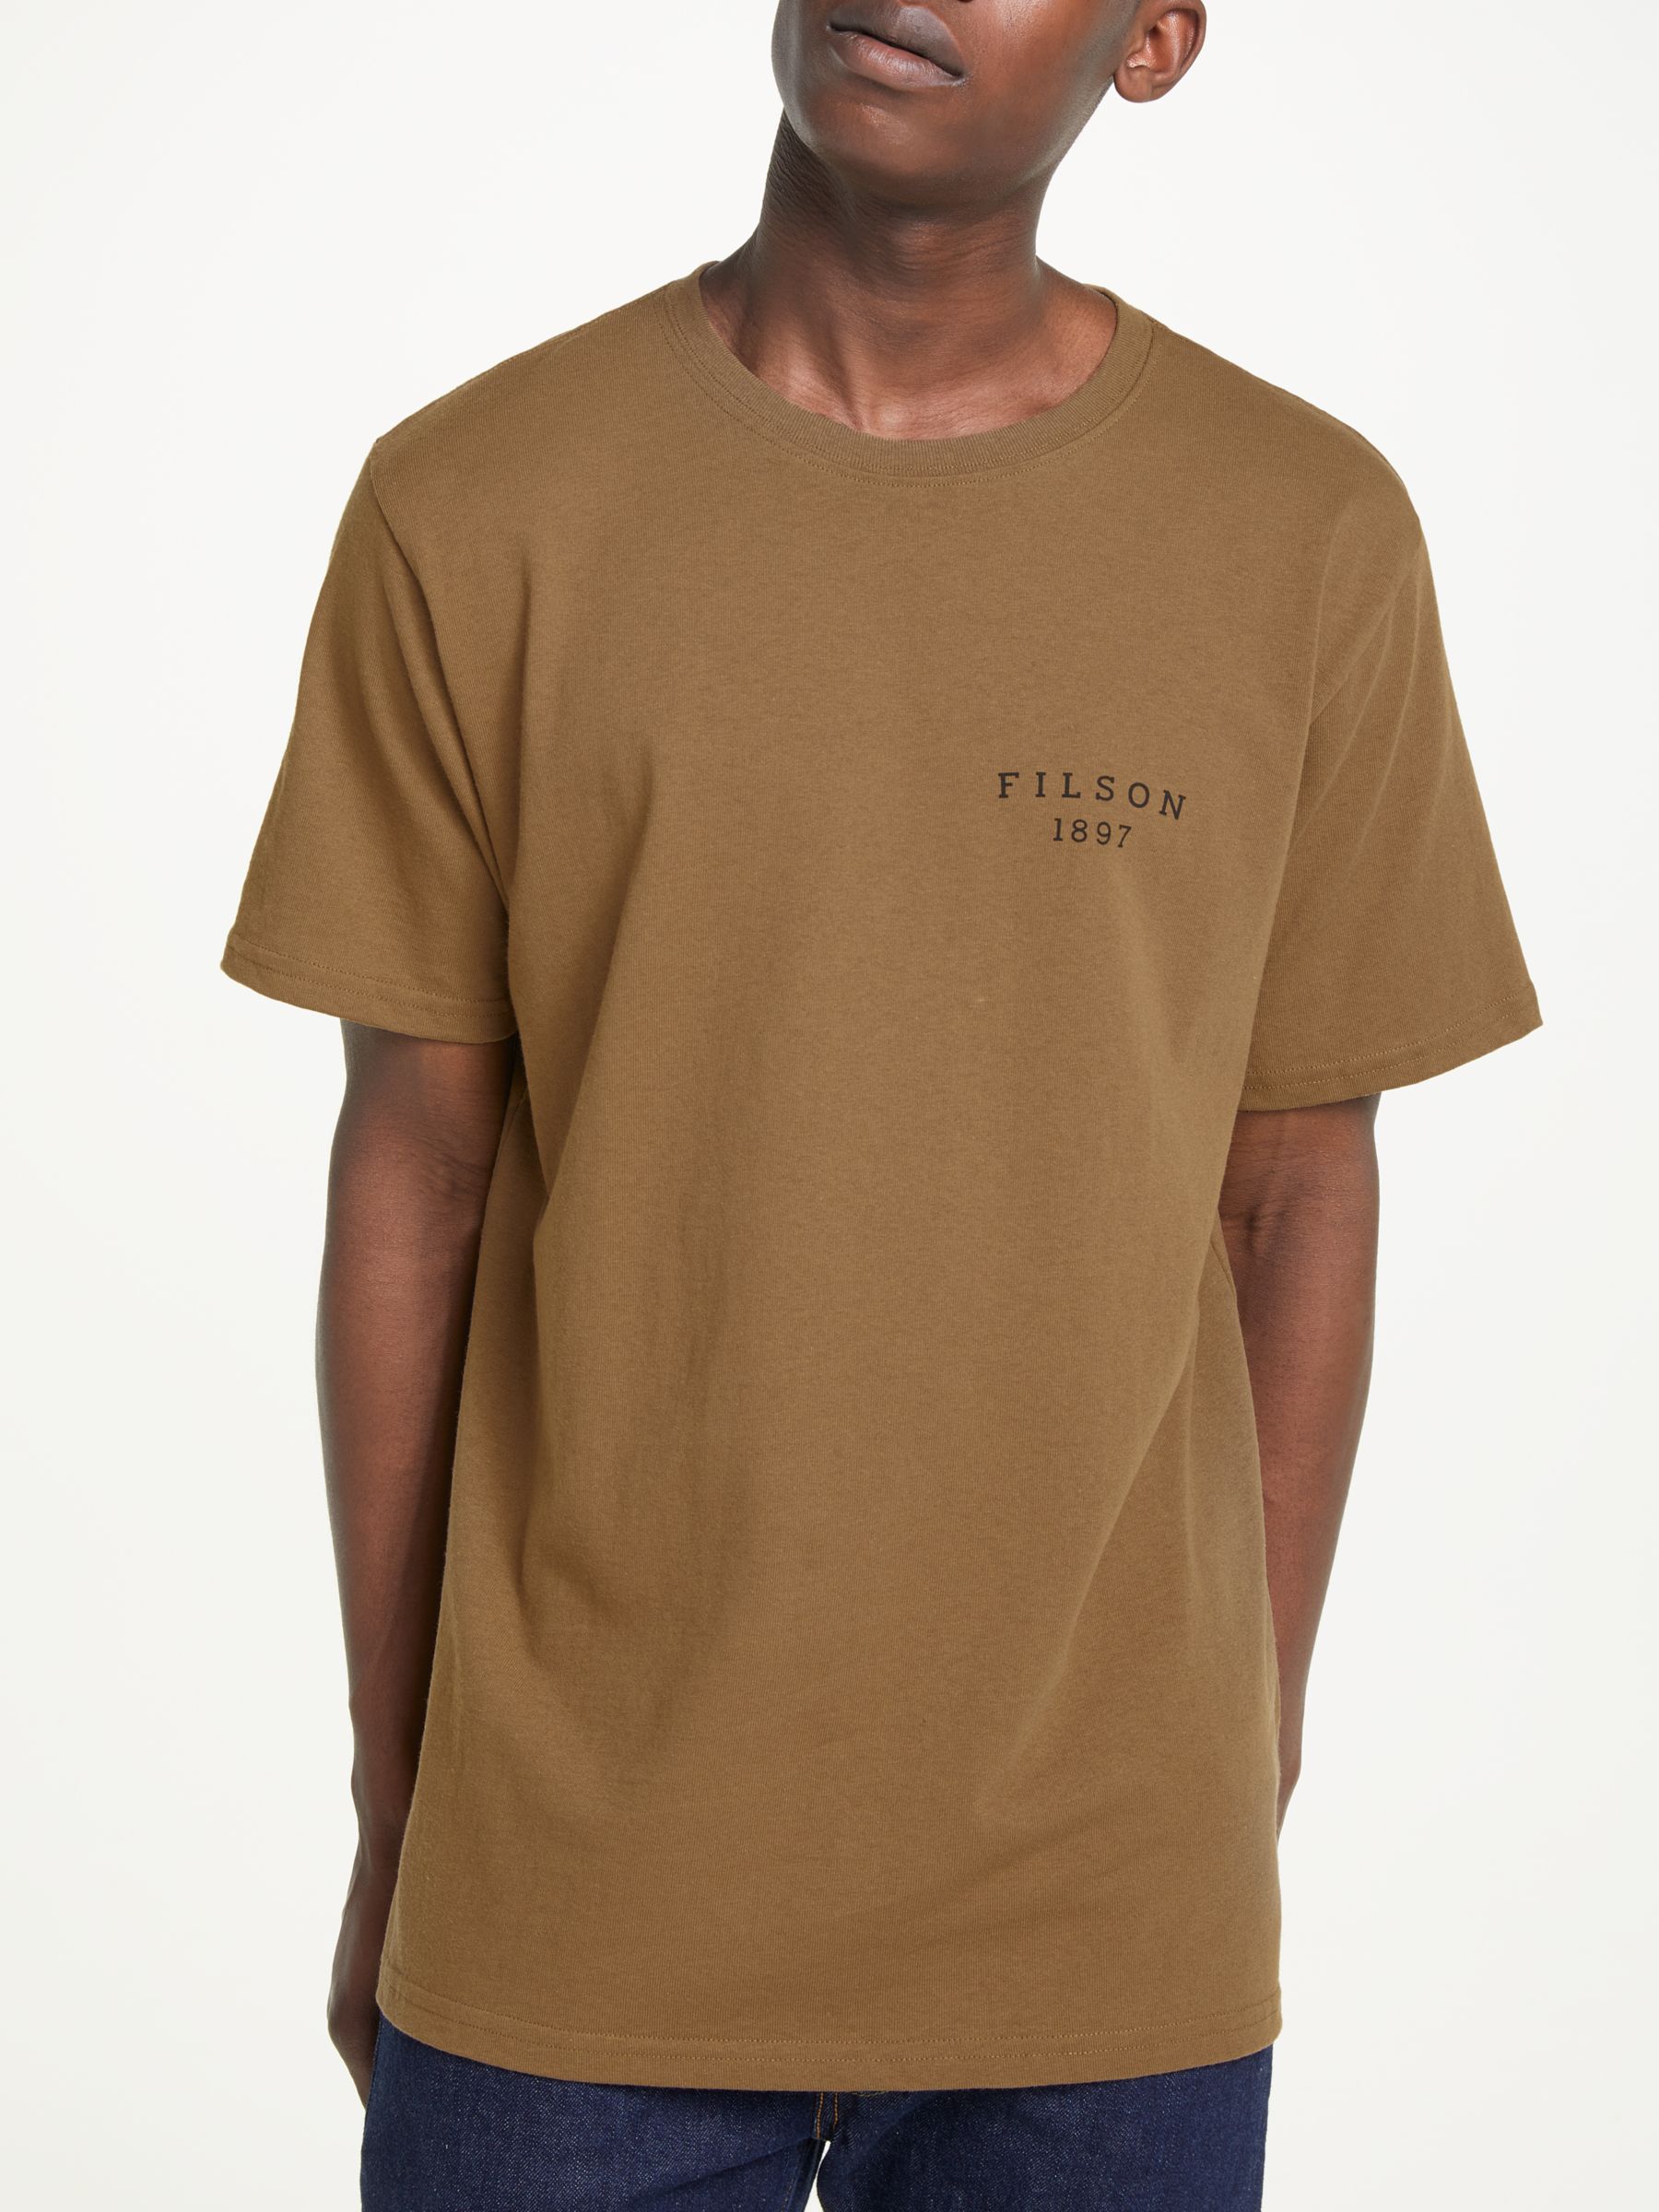 Filson Outfitter Graphic Print T-Shirt, Rugged Tan